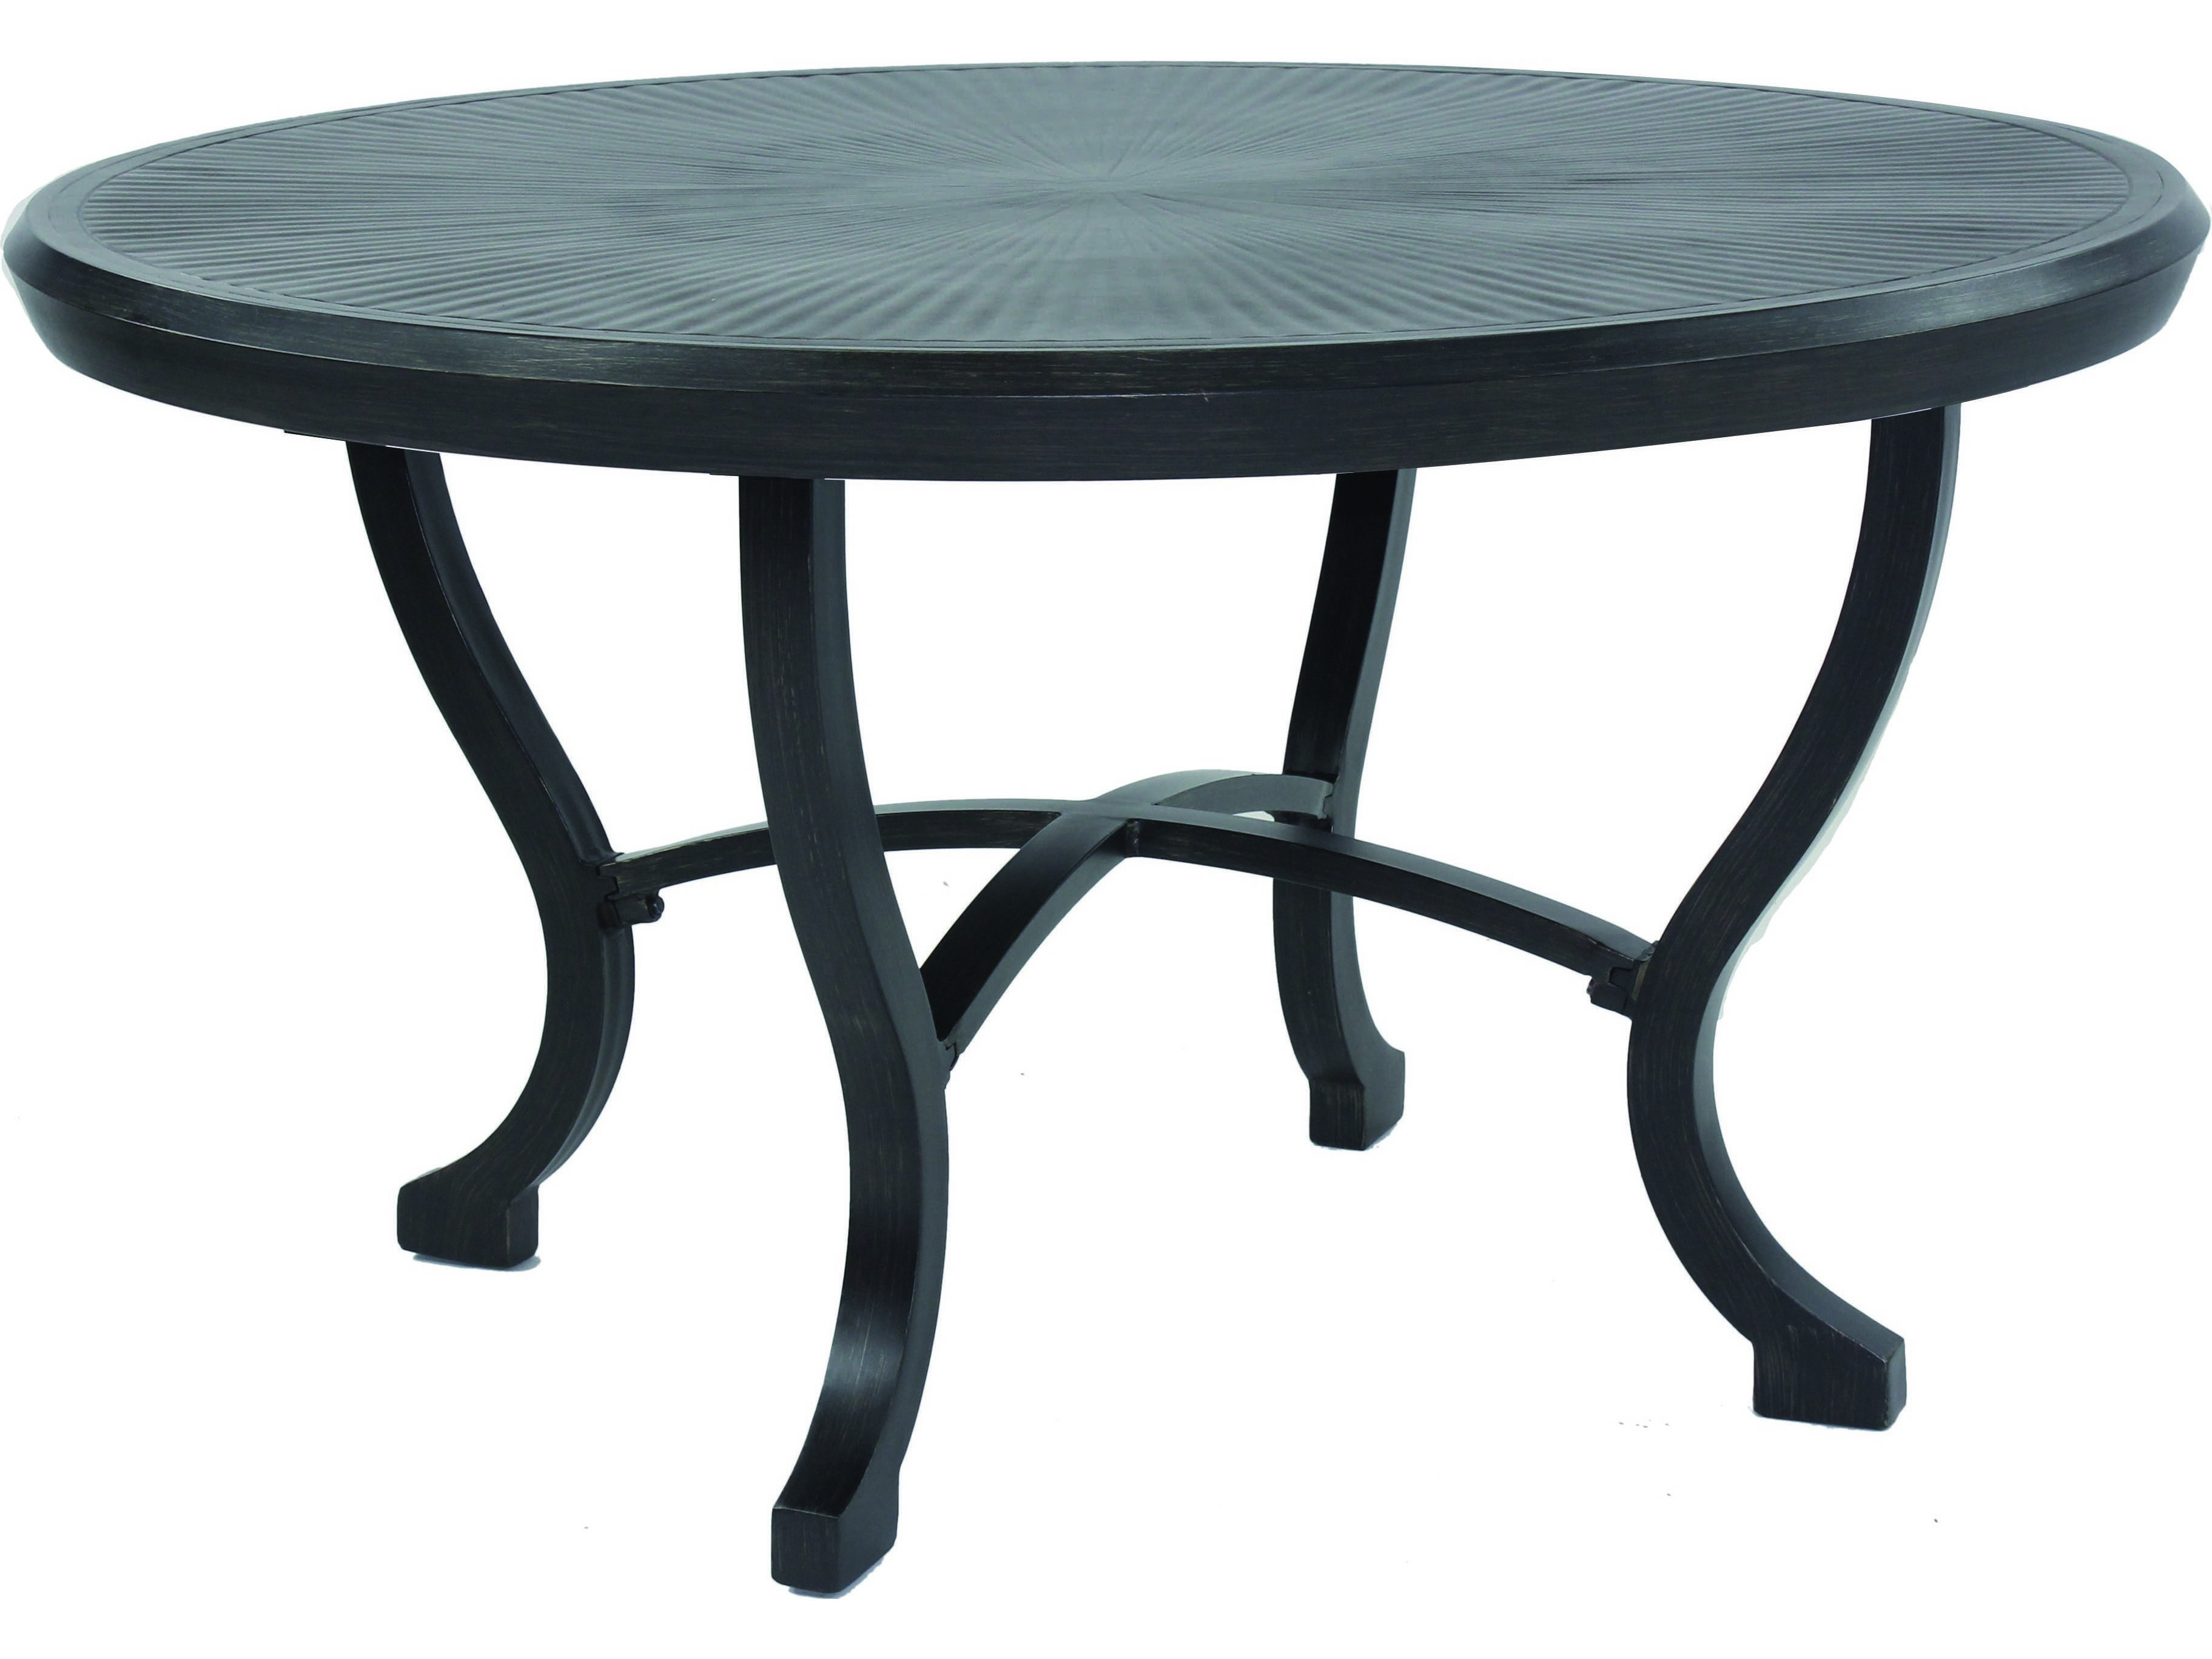 Castelle Chateau Cast Aluminum 54 Round Dining Table (Ready to Assemble ...